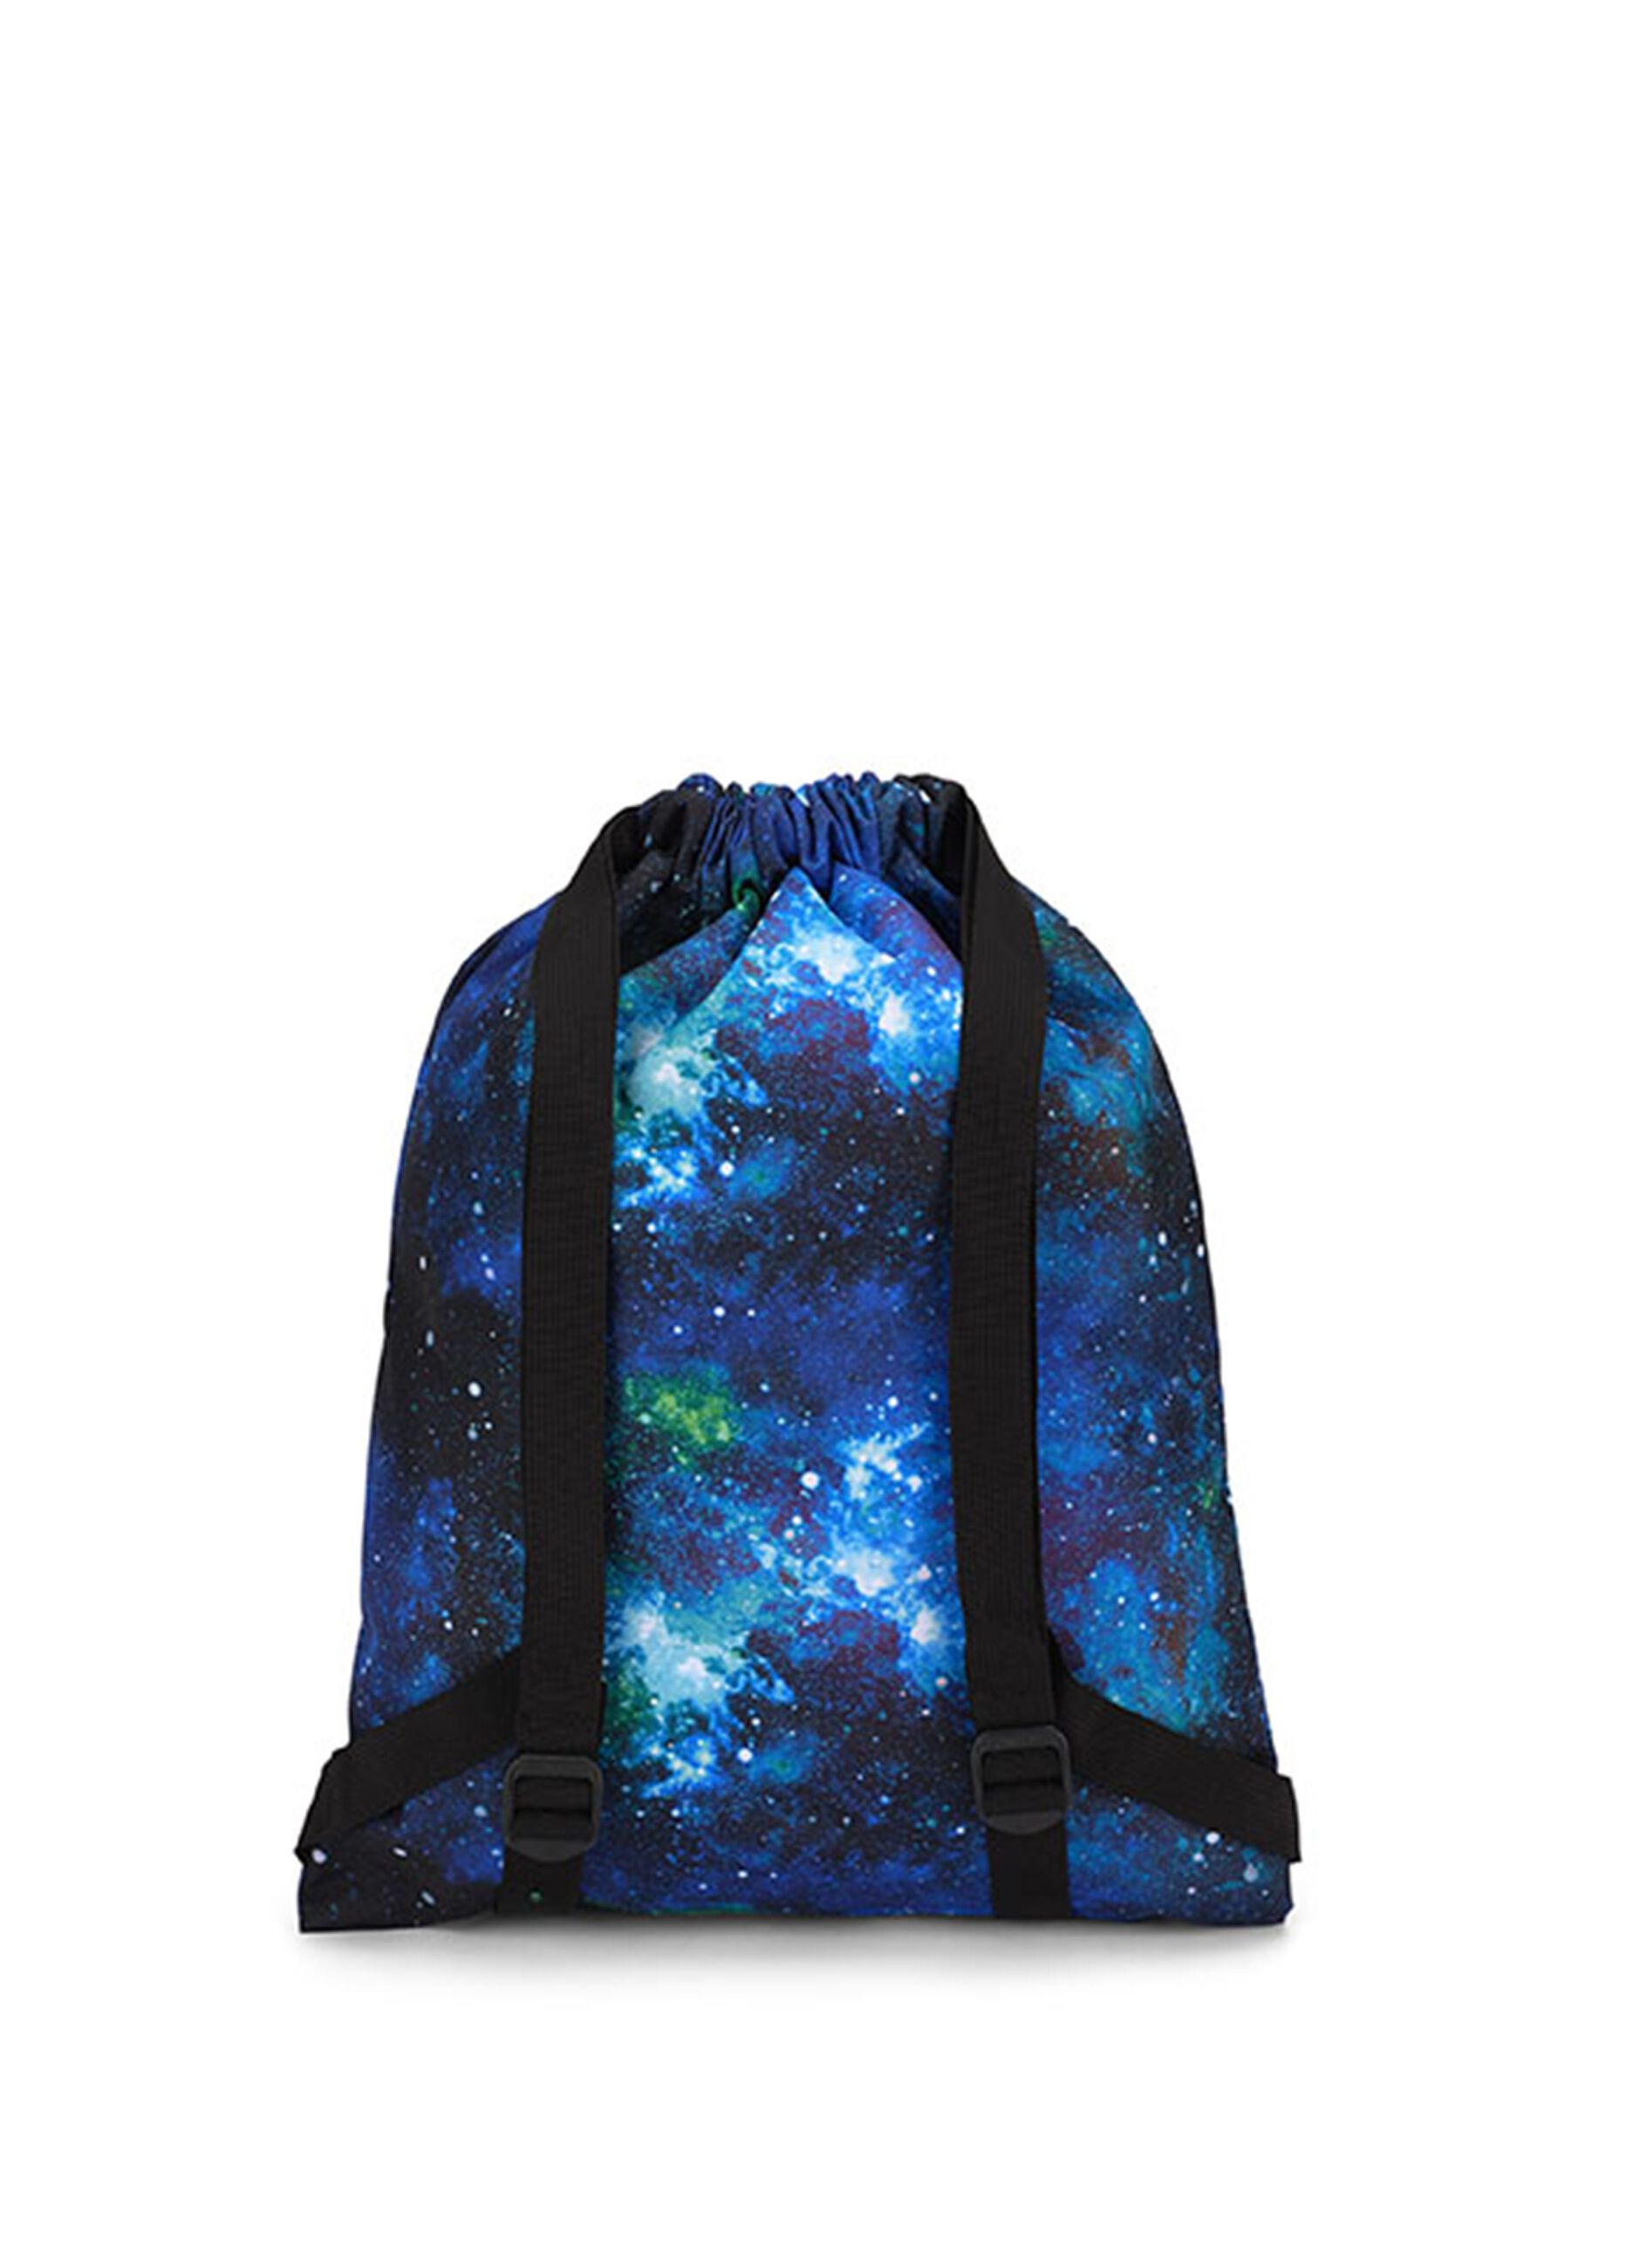 Draw sack backpack with Space Dust pattern